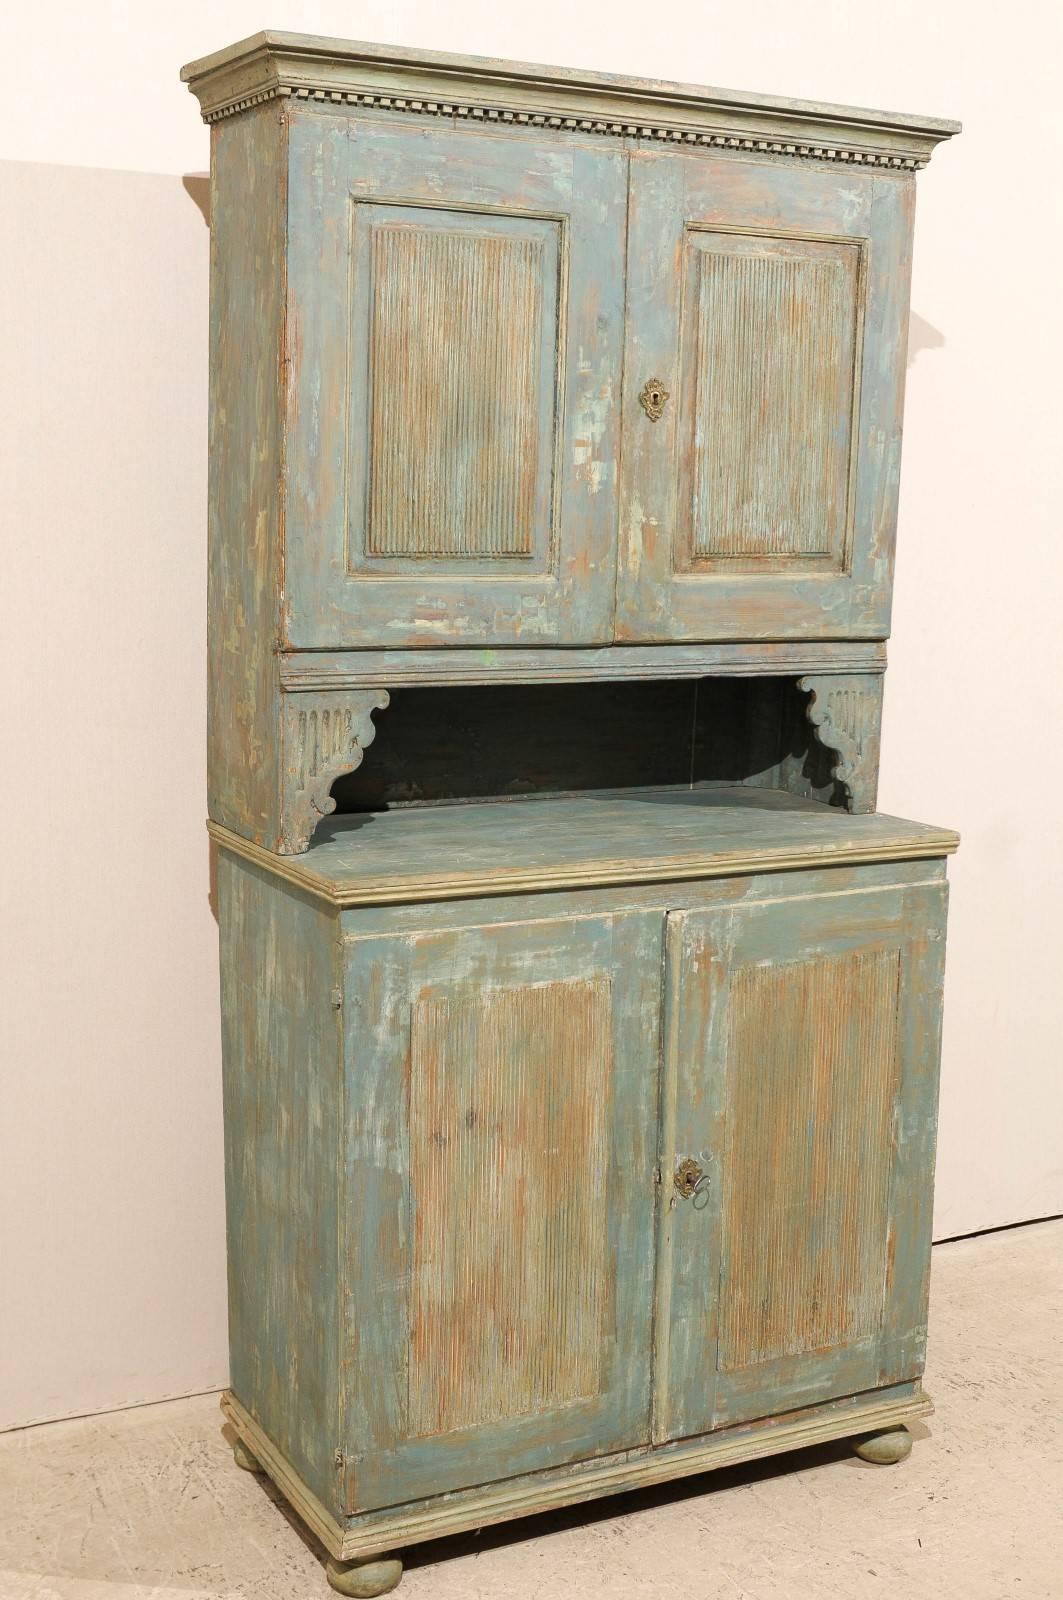 Painted An 18th C. Swedish Late Gustavian Period Cupboard Cabinet w/ it's Original Paint